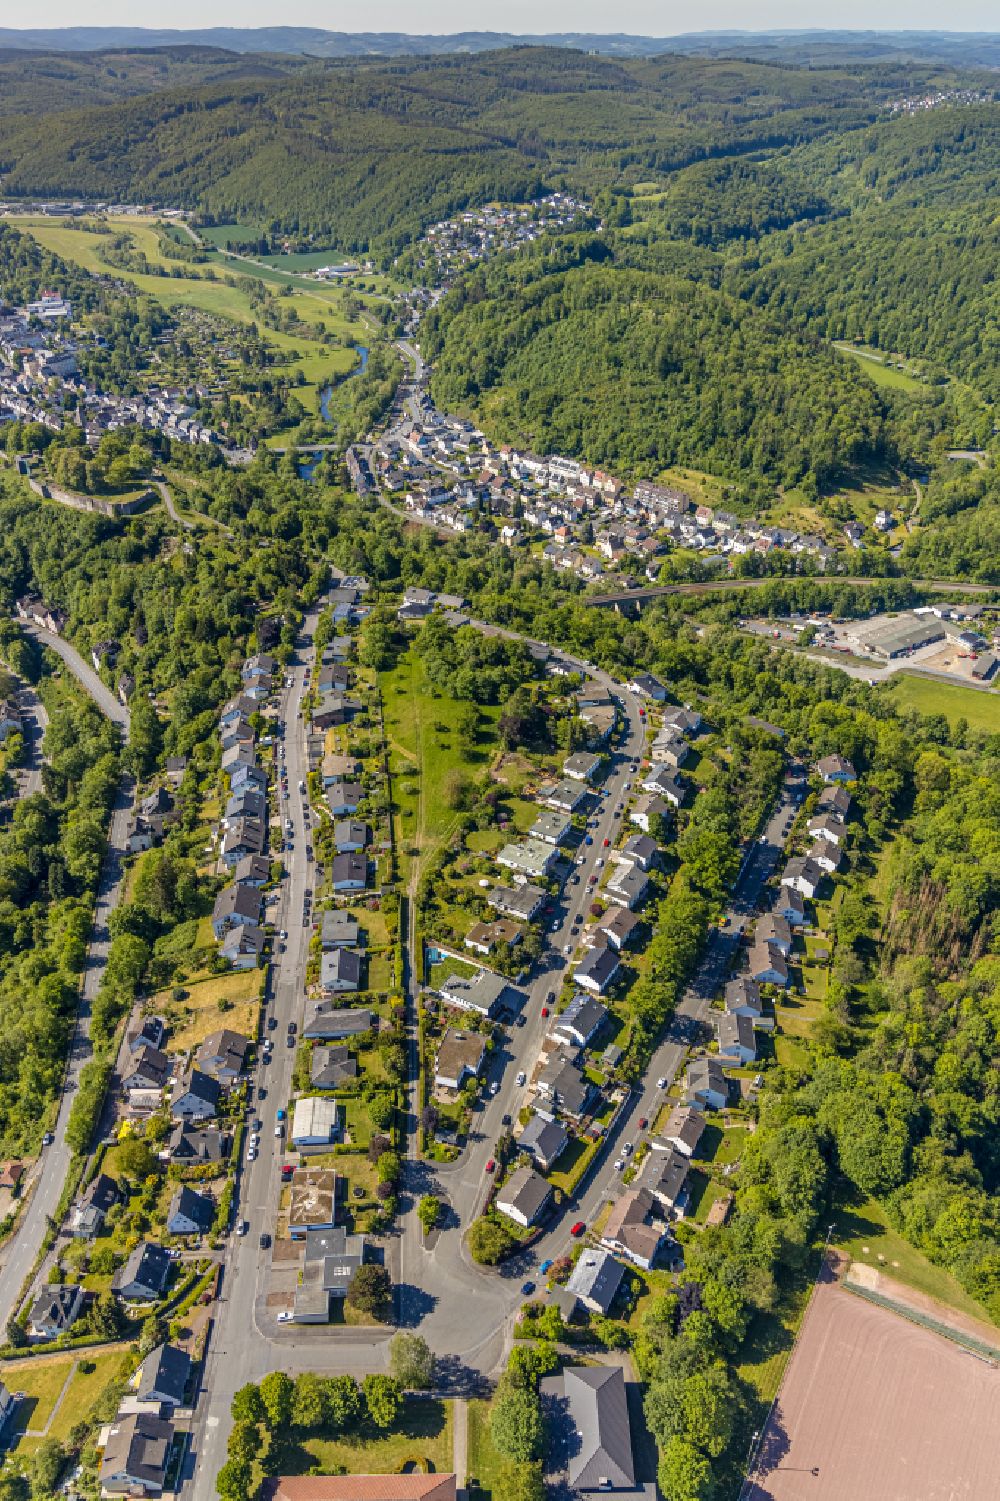 Wennigloh from the bird's eye view: Single-family residential area of settlement in Wennigloh in the state North Rhine-Westphalia, Germany